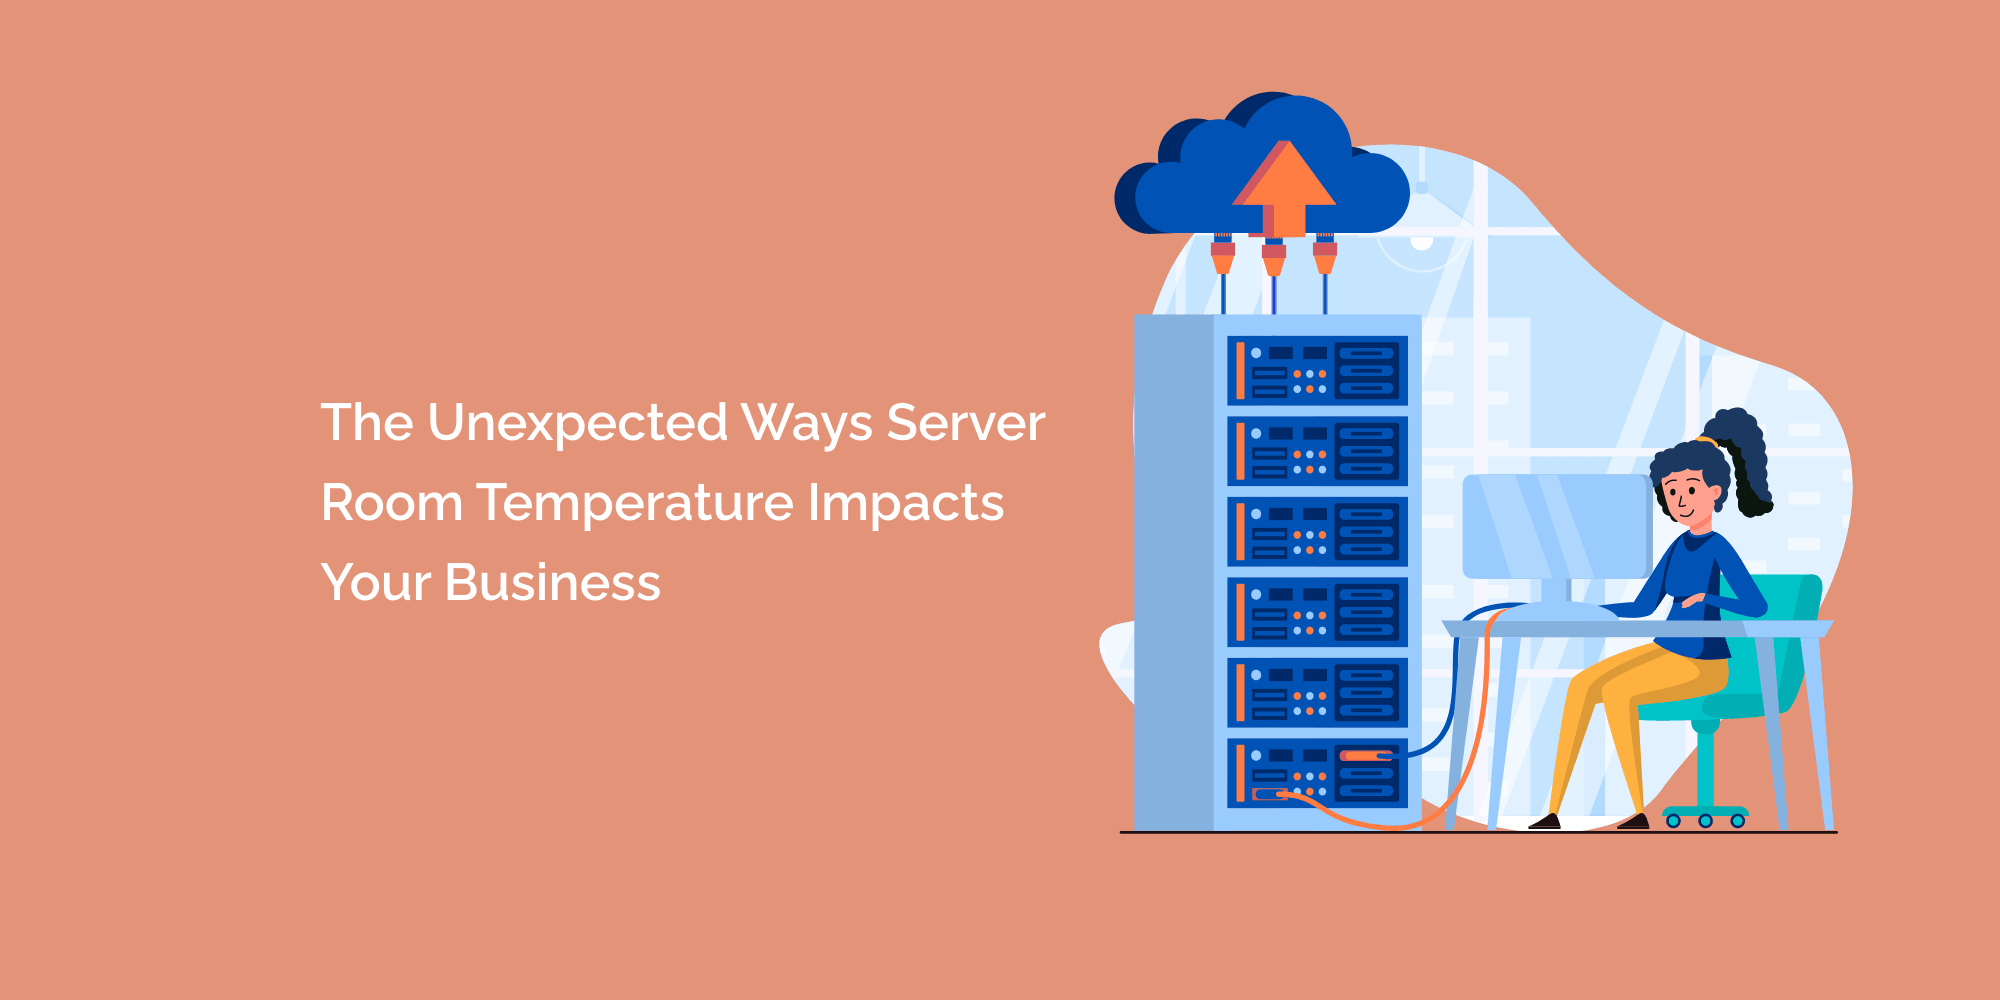 The Unexpected Ways Server Room Temperature Impacts Your Business